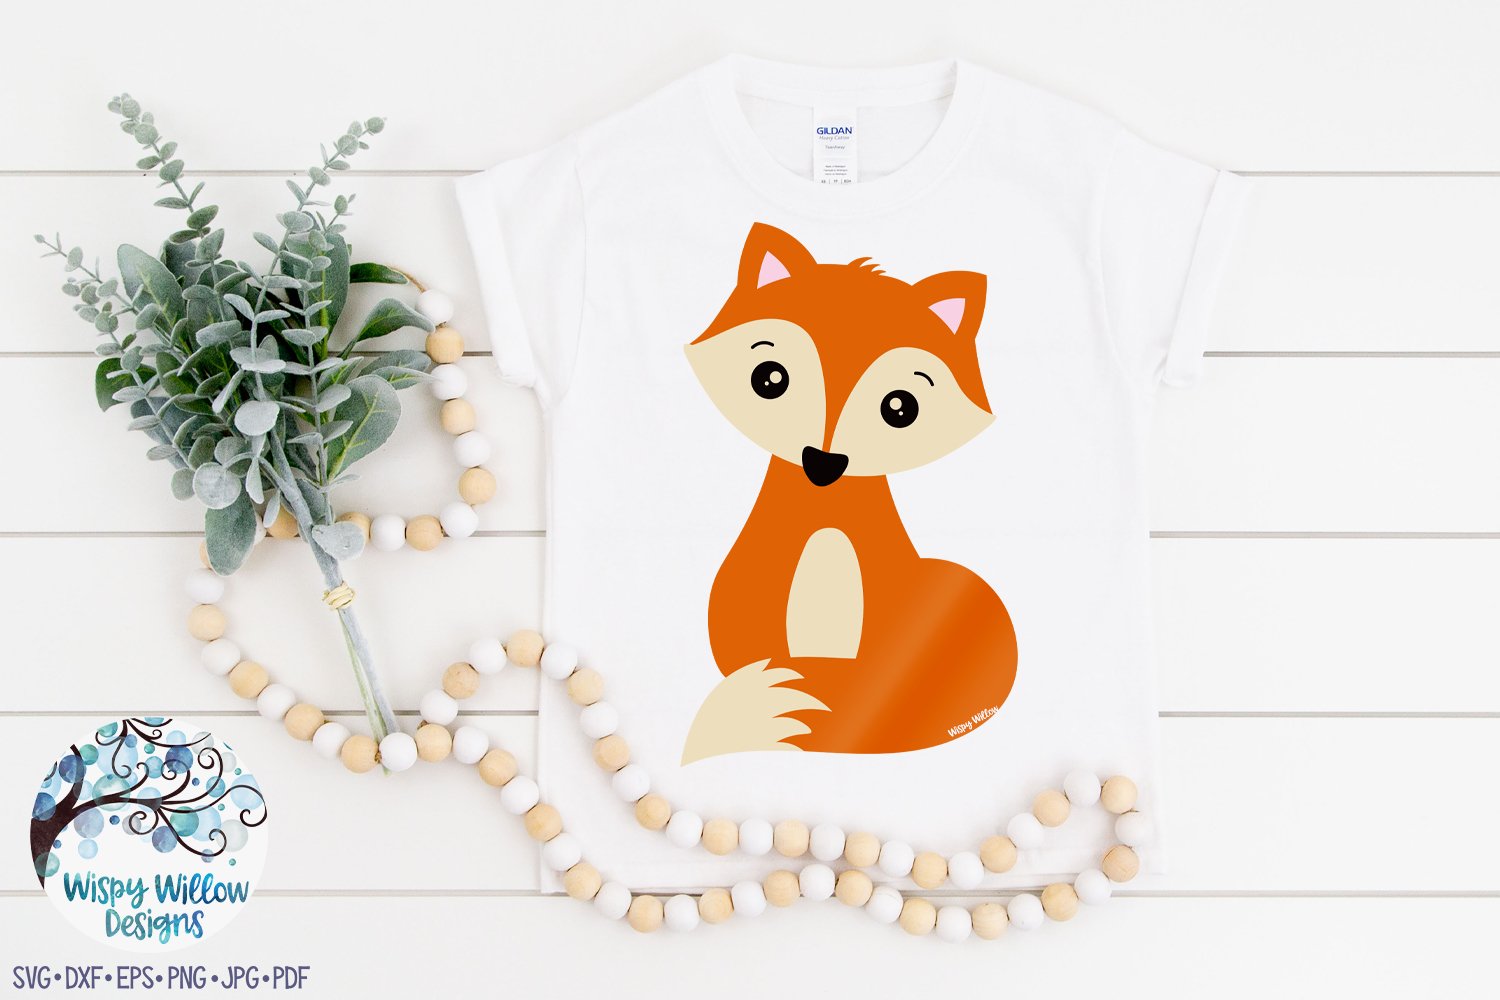 T - shirt with a picture of a fox on it.